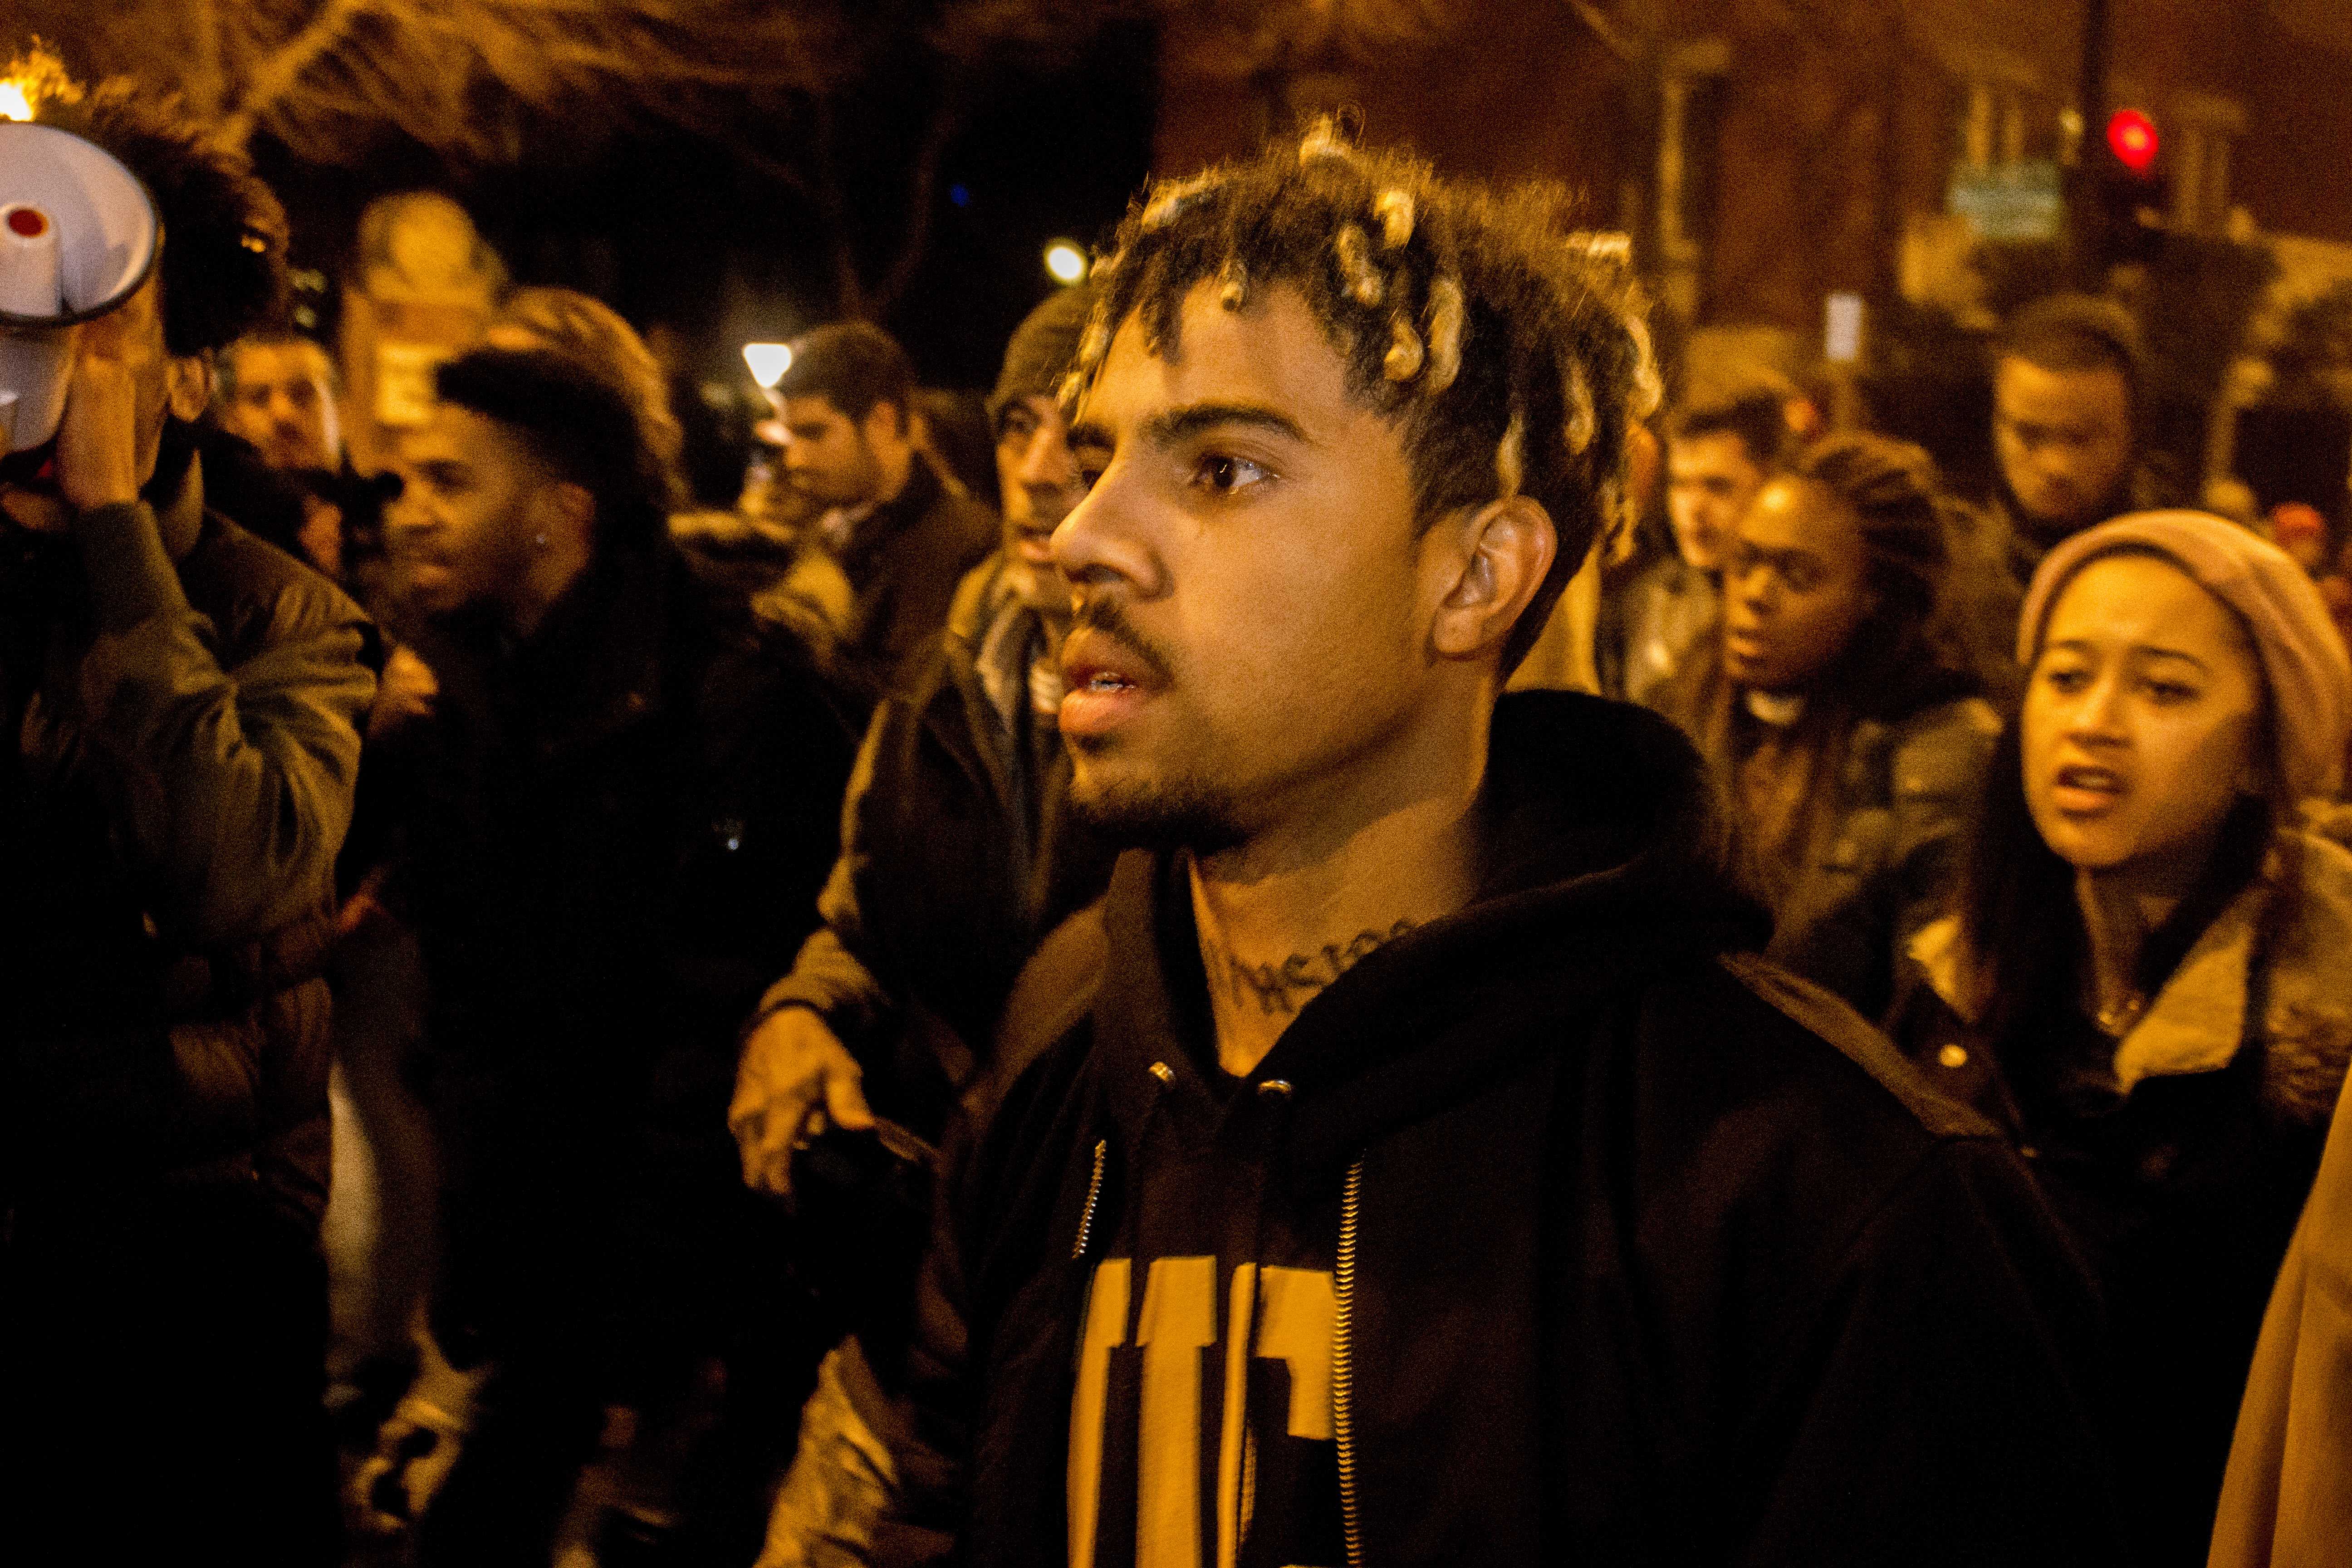 Laquan+McDonald+police+video+spurs+Chicago+protests